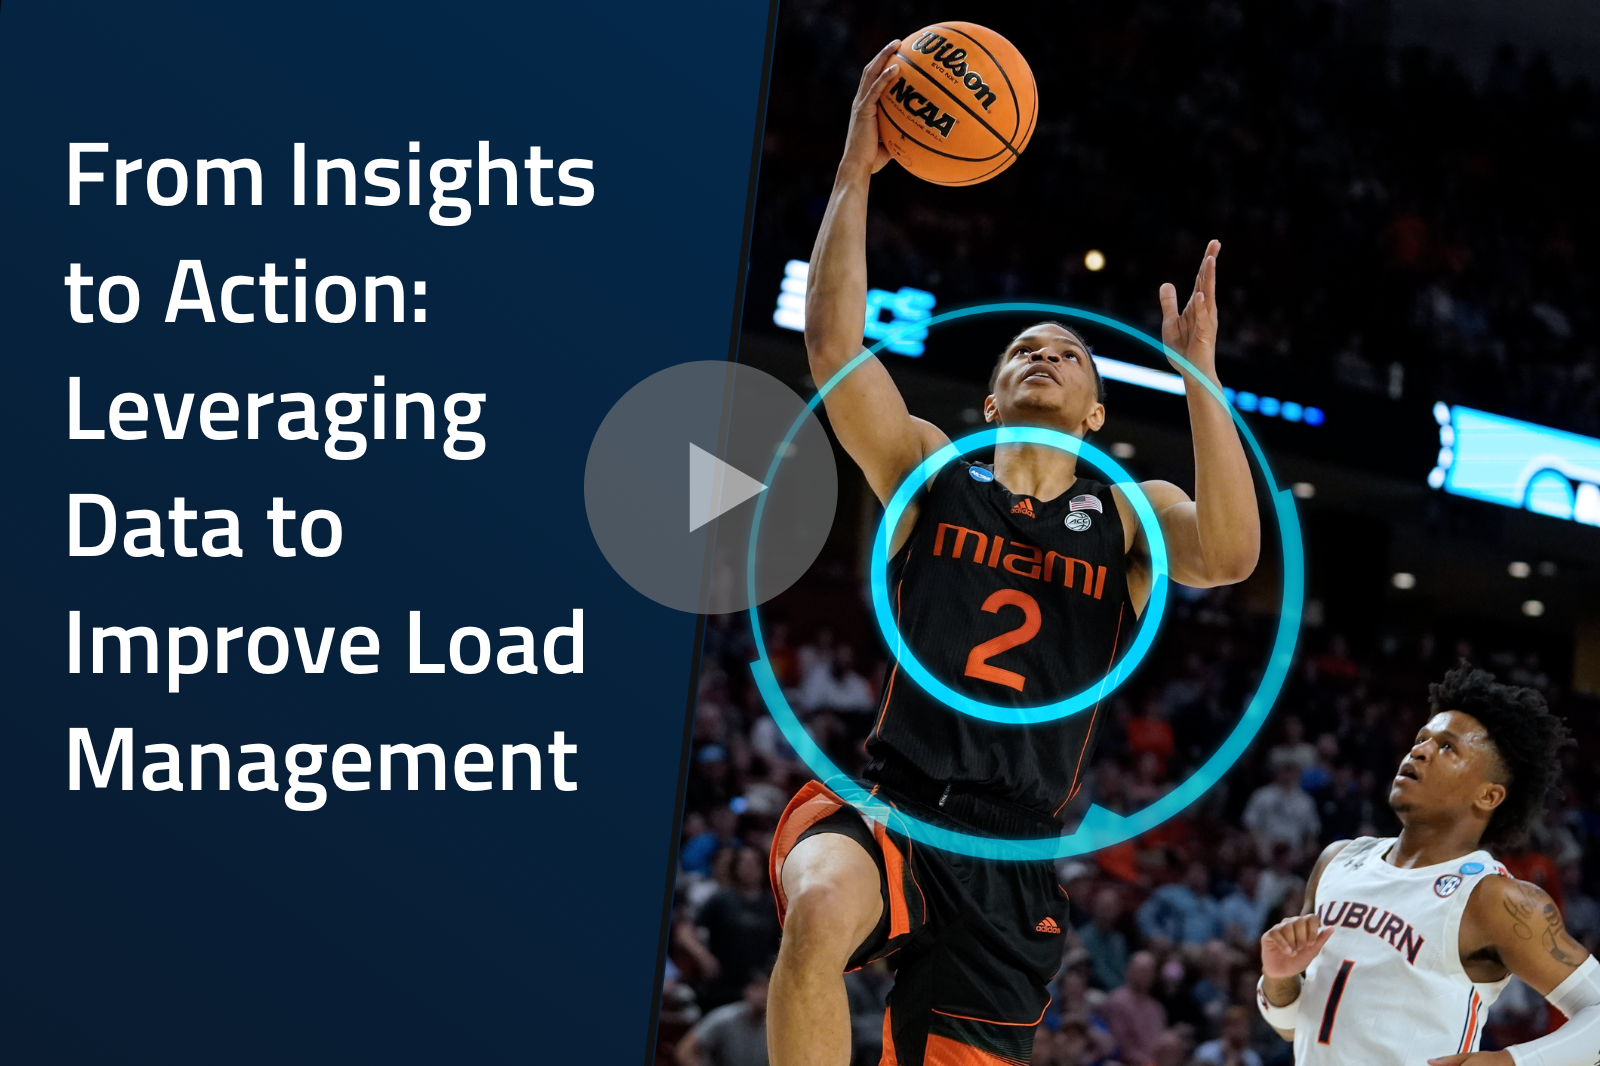 Load Management-NBA teams started tracking it in 2010 and now every team is doing it, including NCAA men's and women's teams.